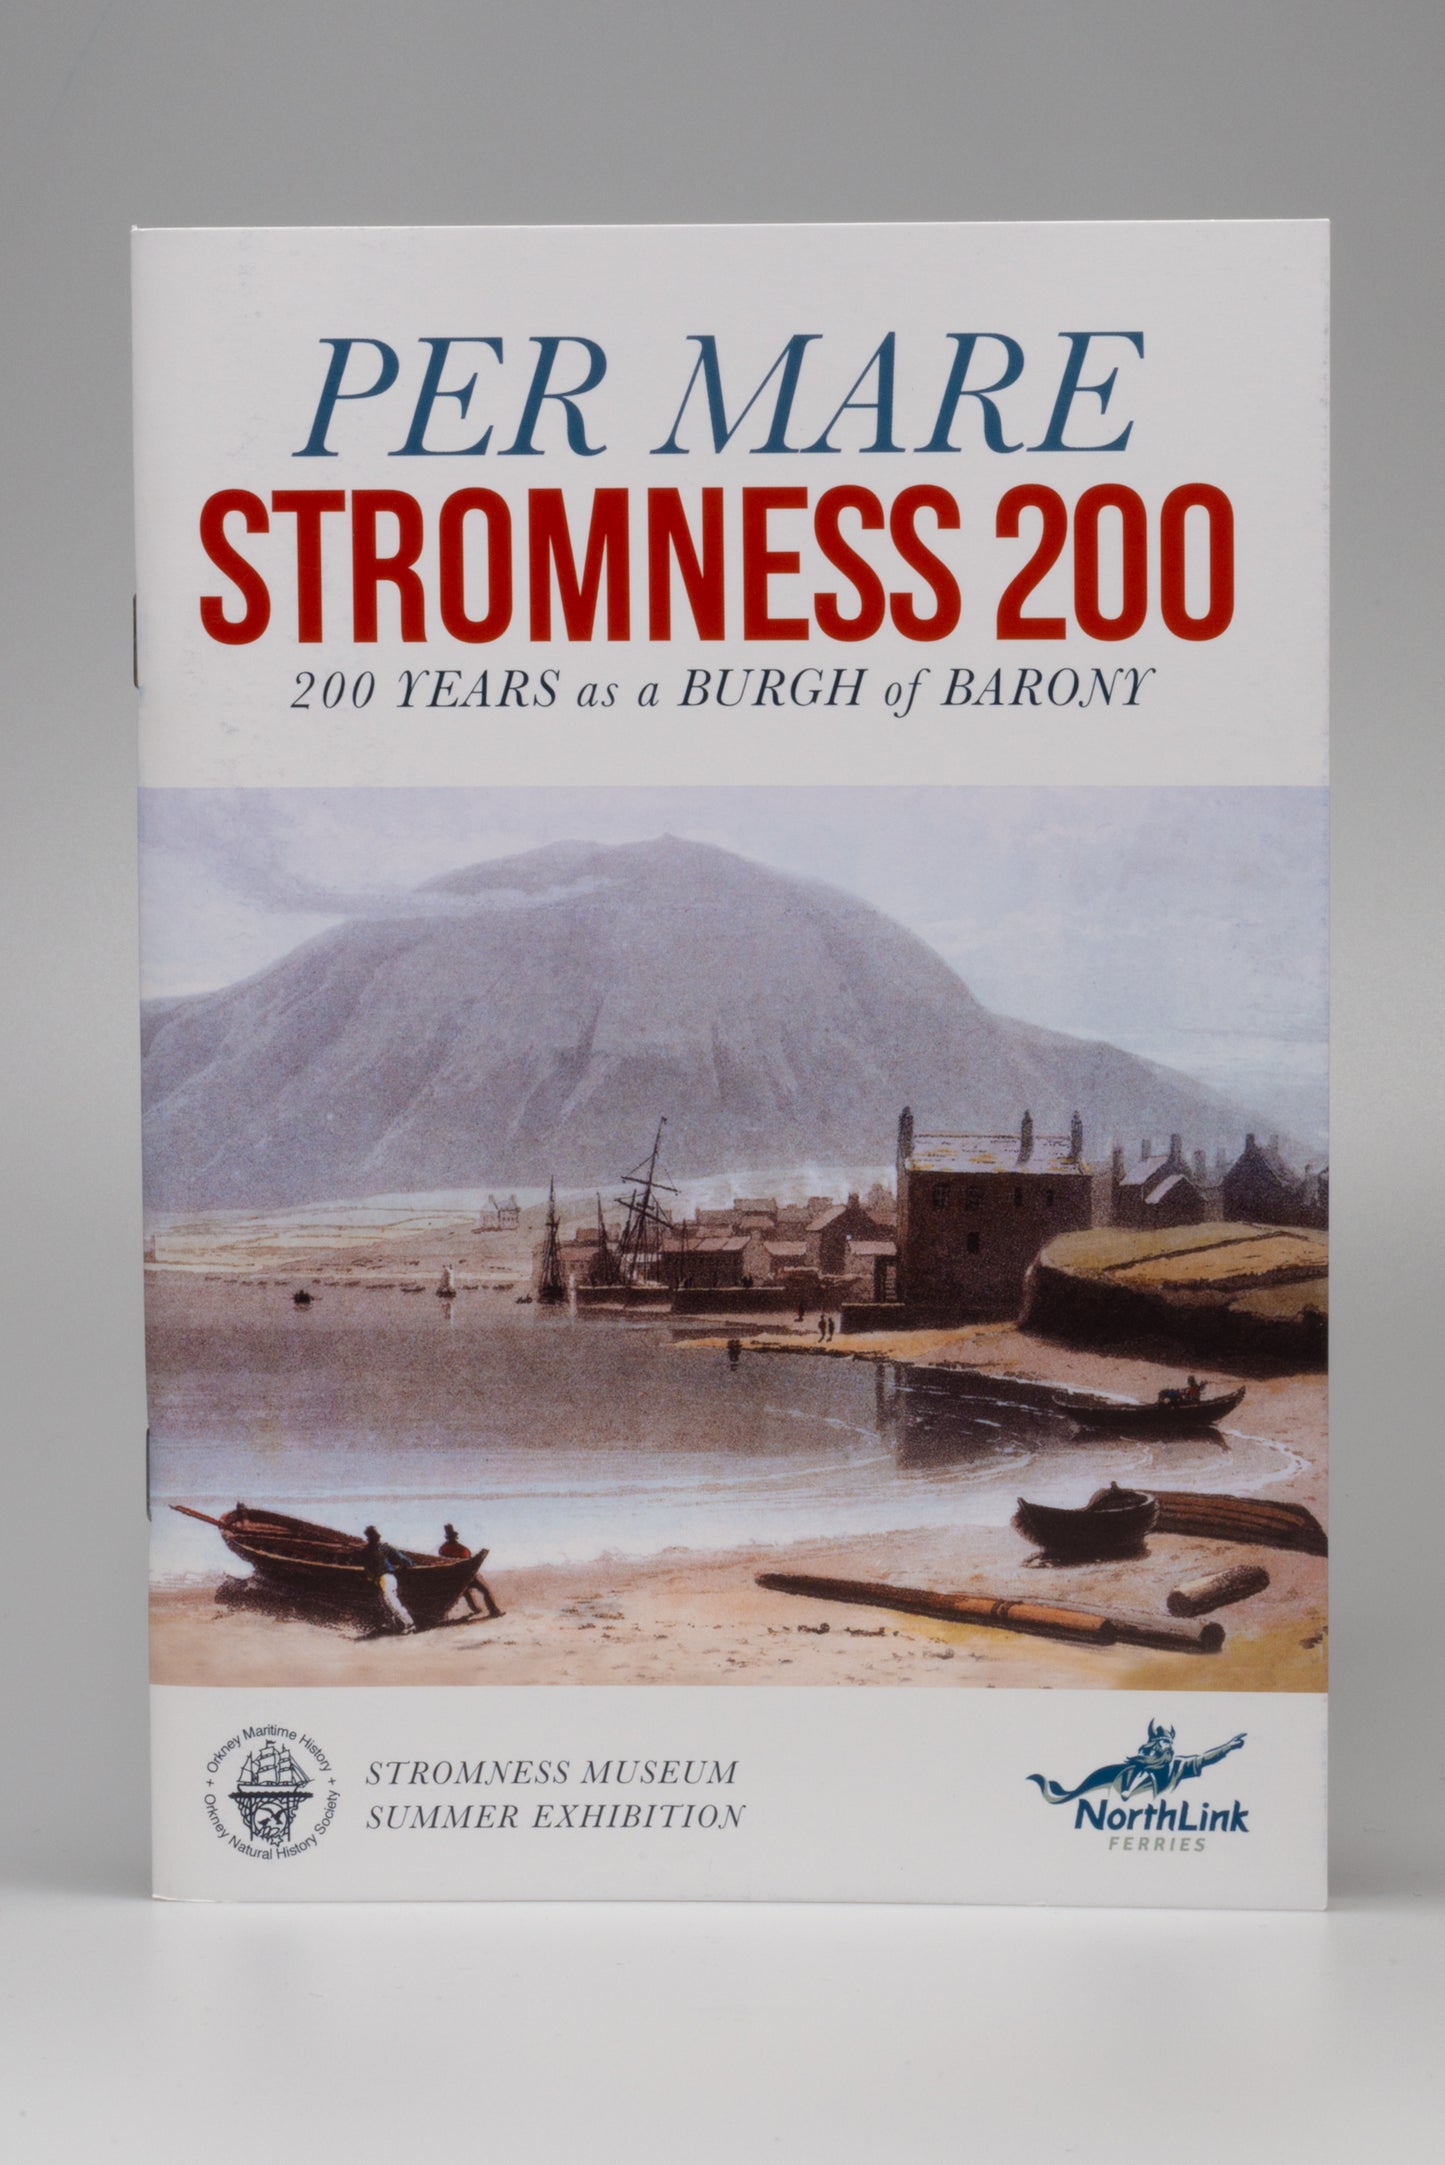 Per Mare Stromness 200, 200 years as a Burgh of Barony